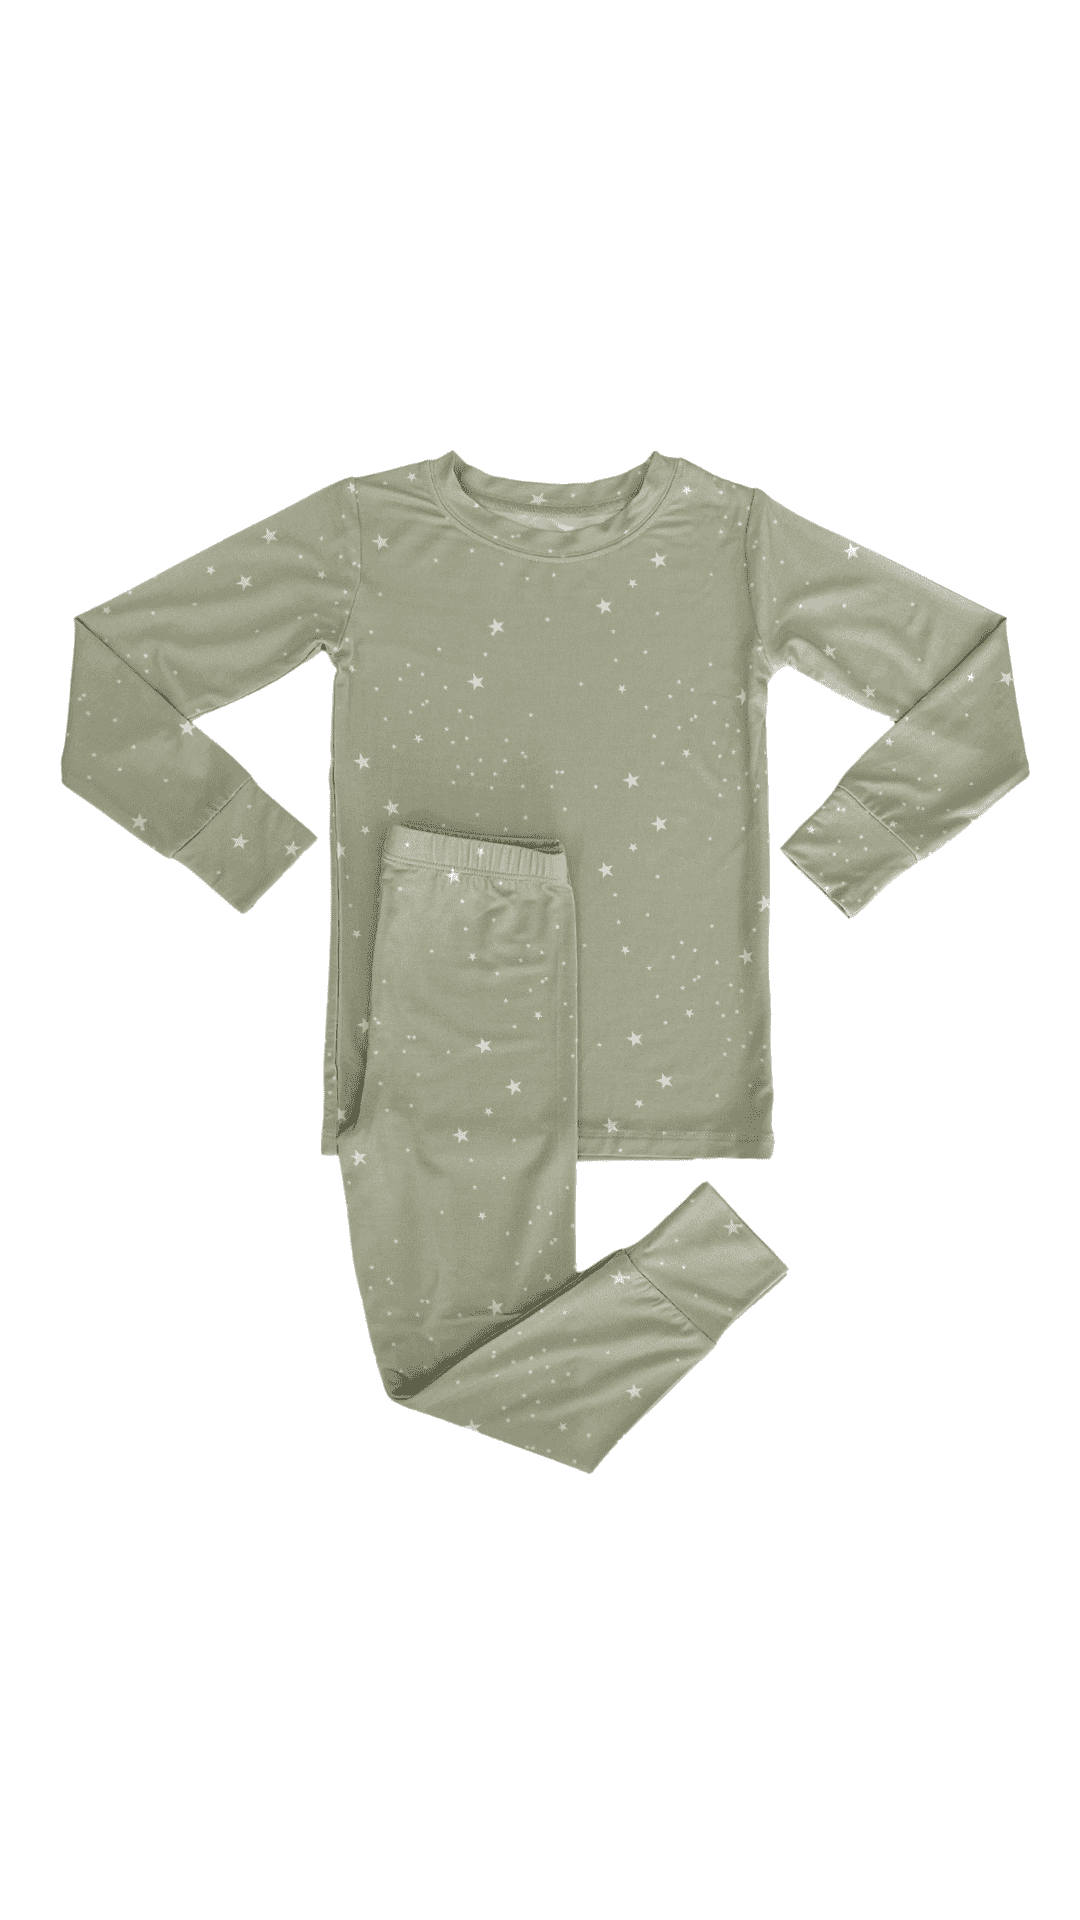 Green Star Two Piece Set.